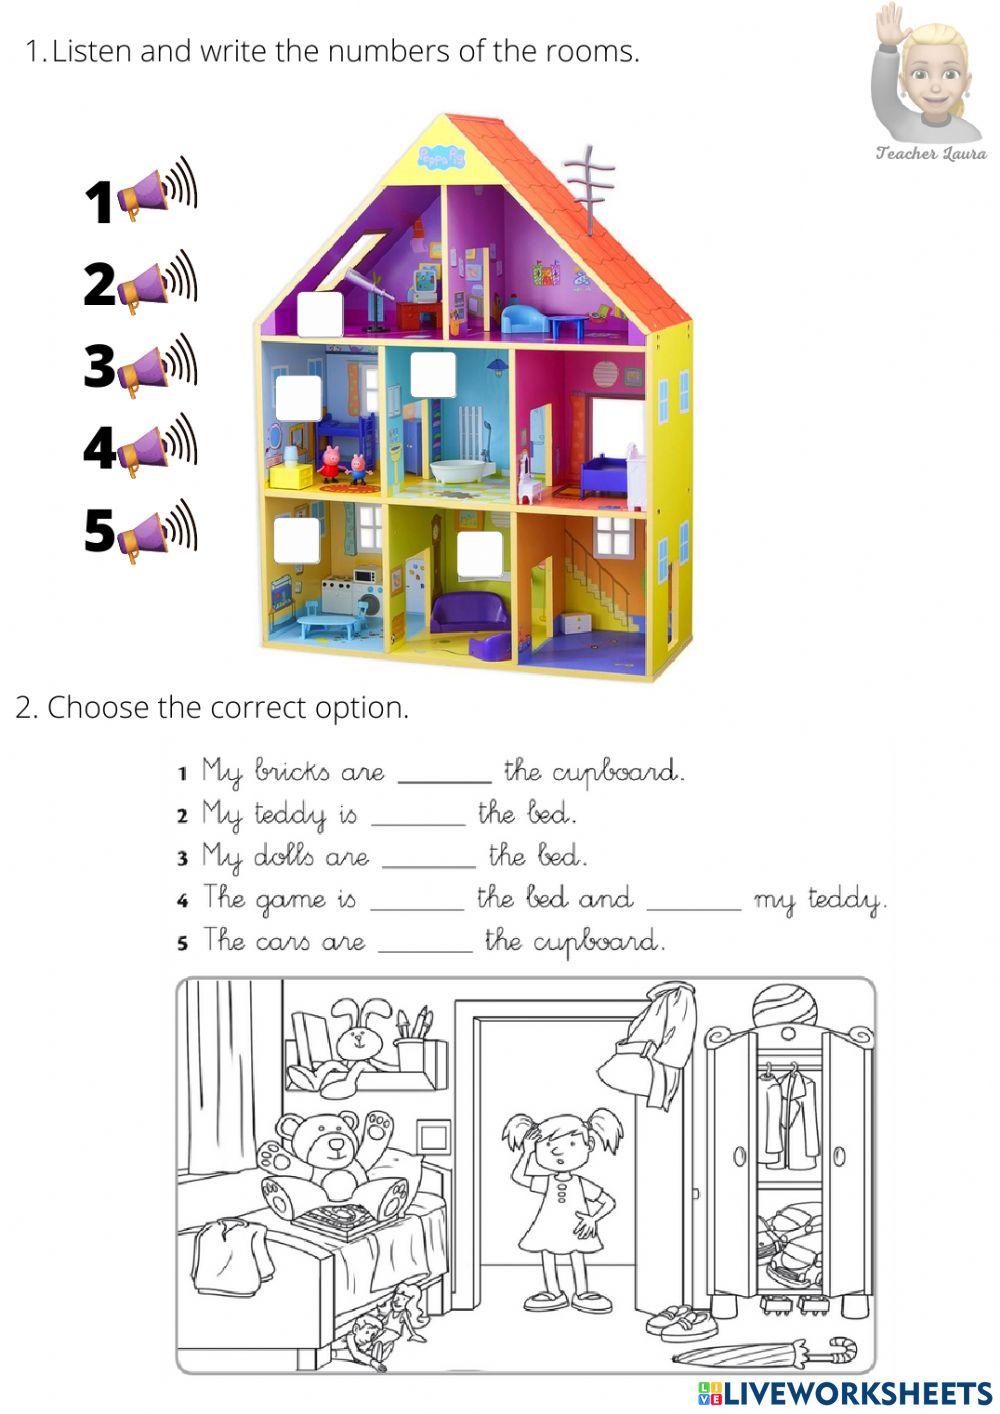 Prepositions in on under. toys, house.